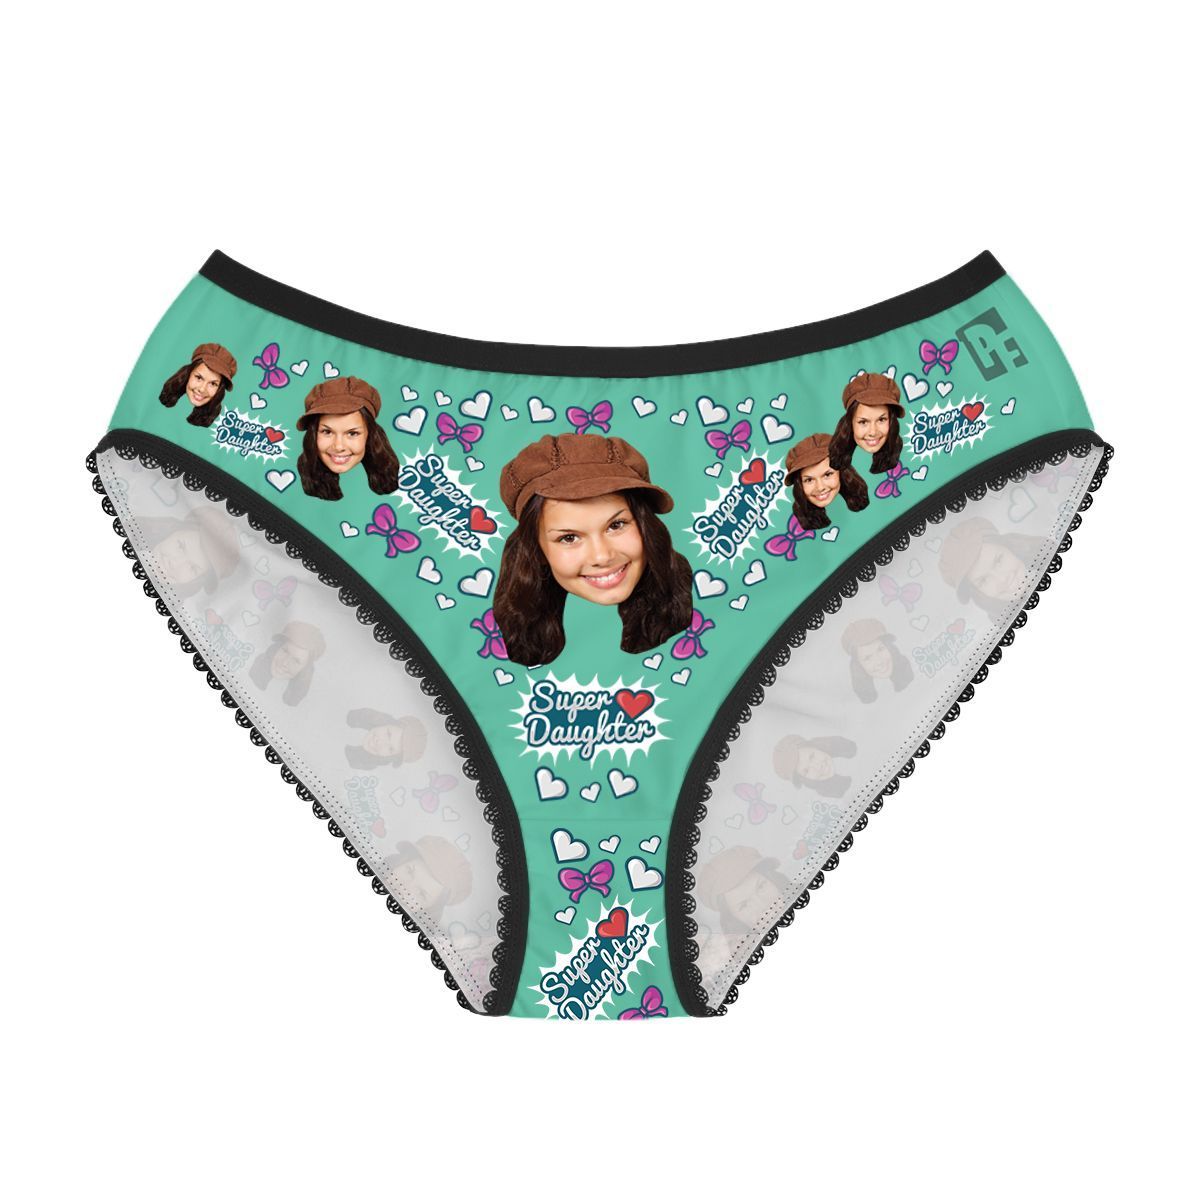 Mint Super daughter women's underwear briefs personalized with photo printed on them